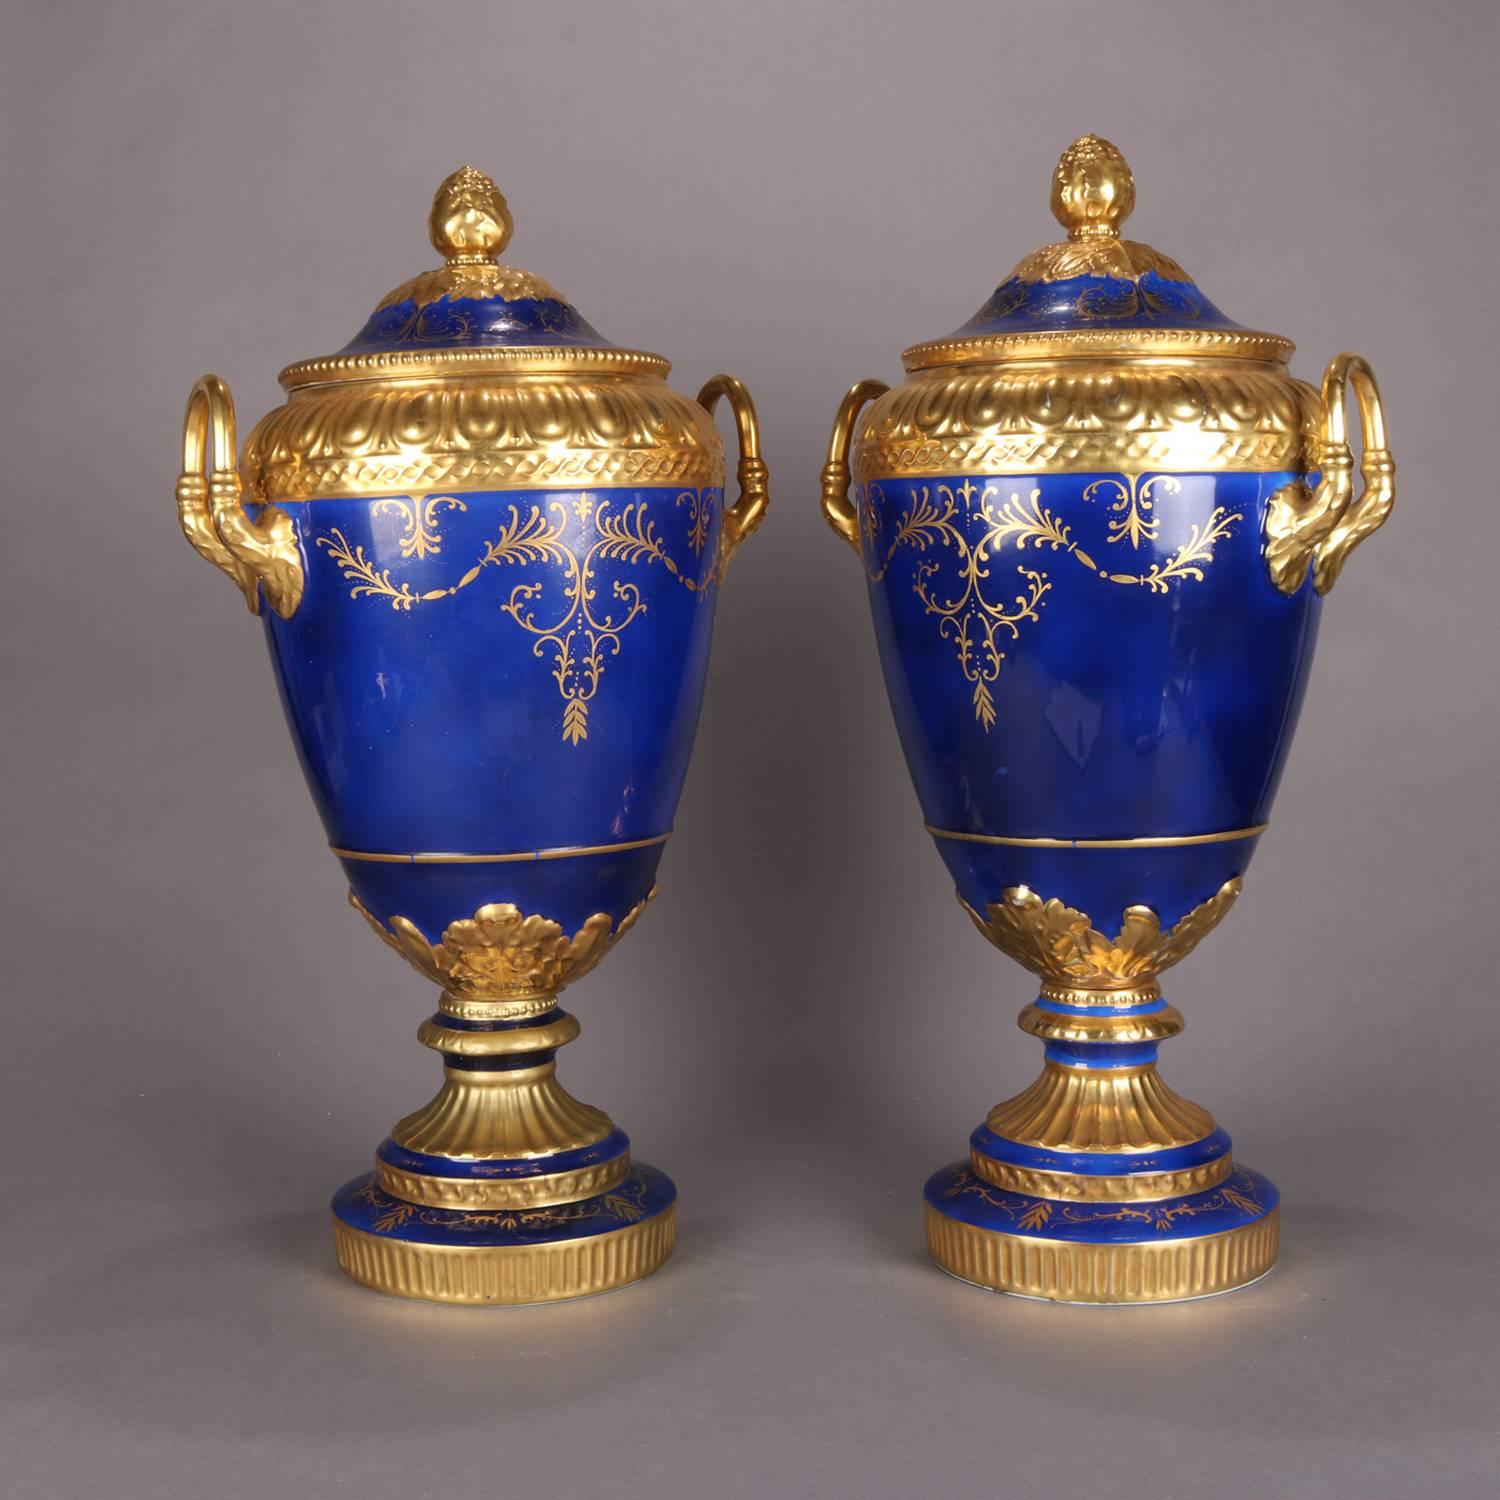 Pair of monumental French Serves School double handled footed and lidded urns feature heavily gilt foliate and scroll decoration on cobalt blue ground, style urns, 20th century

Measures: 24